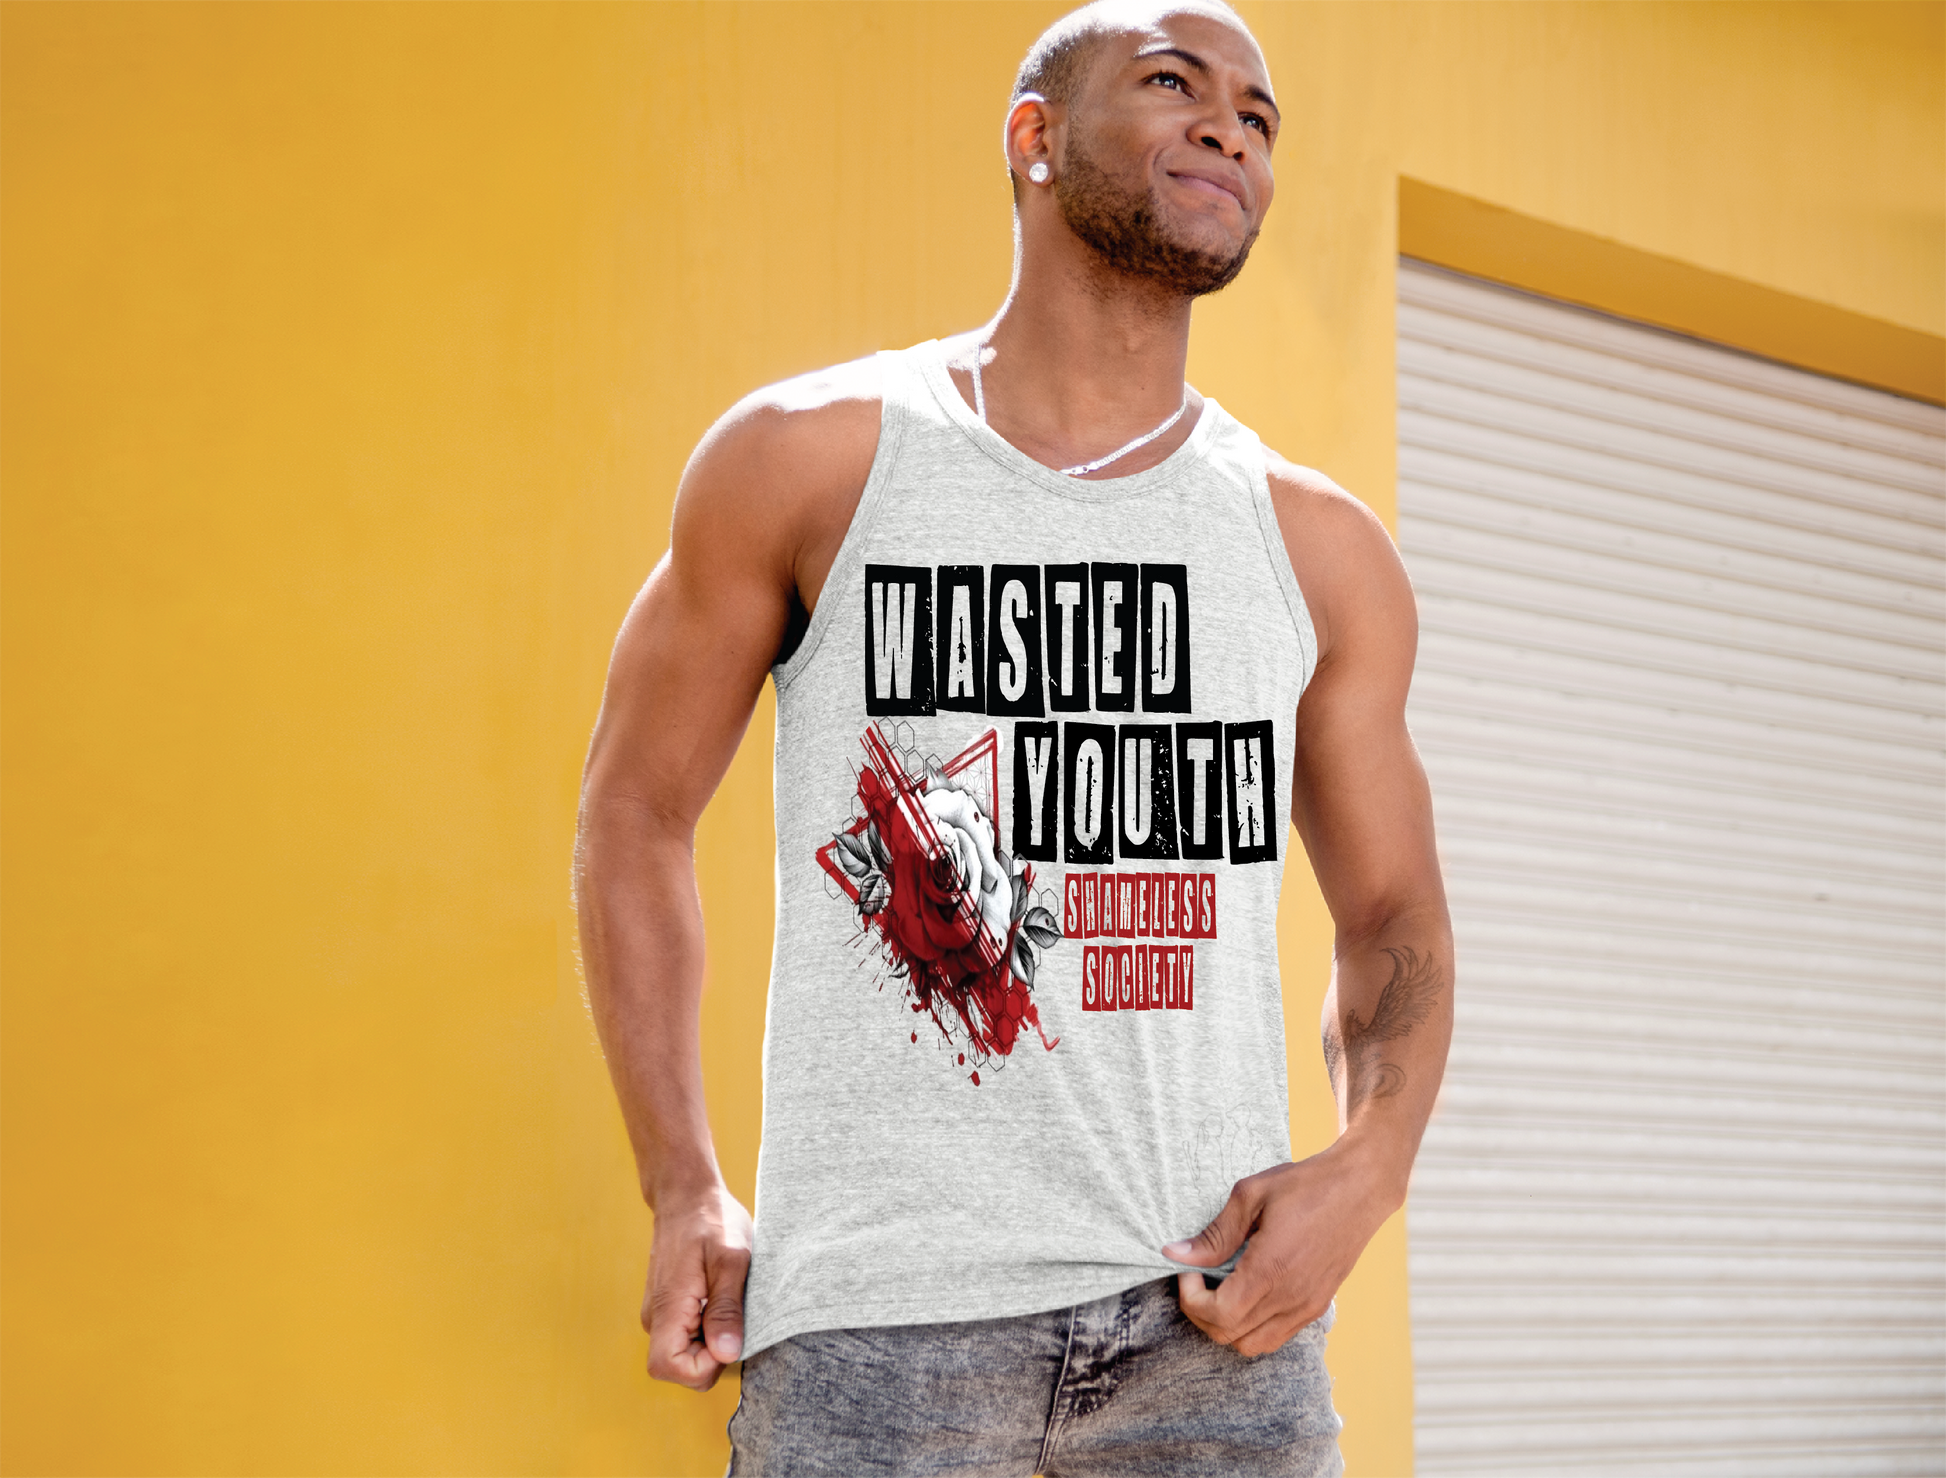 Wasted Youth Men's Tank Top